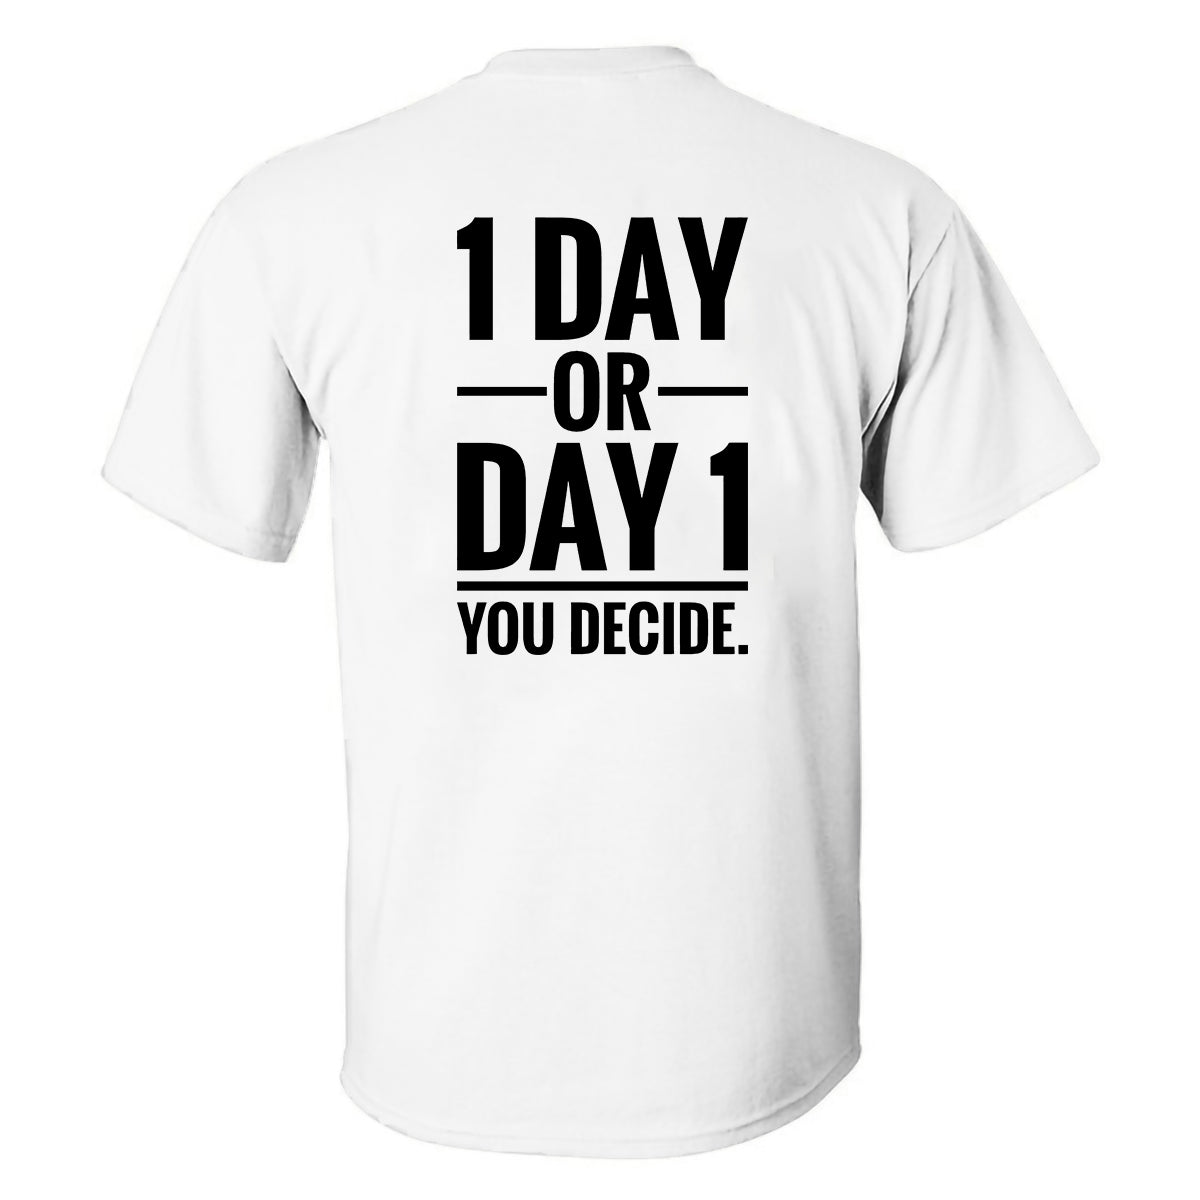 1 Day Or Day 1 You Decide Printed Men's T-shirt